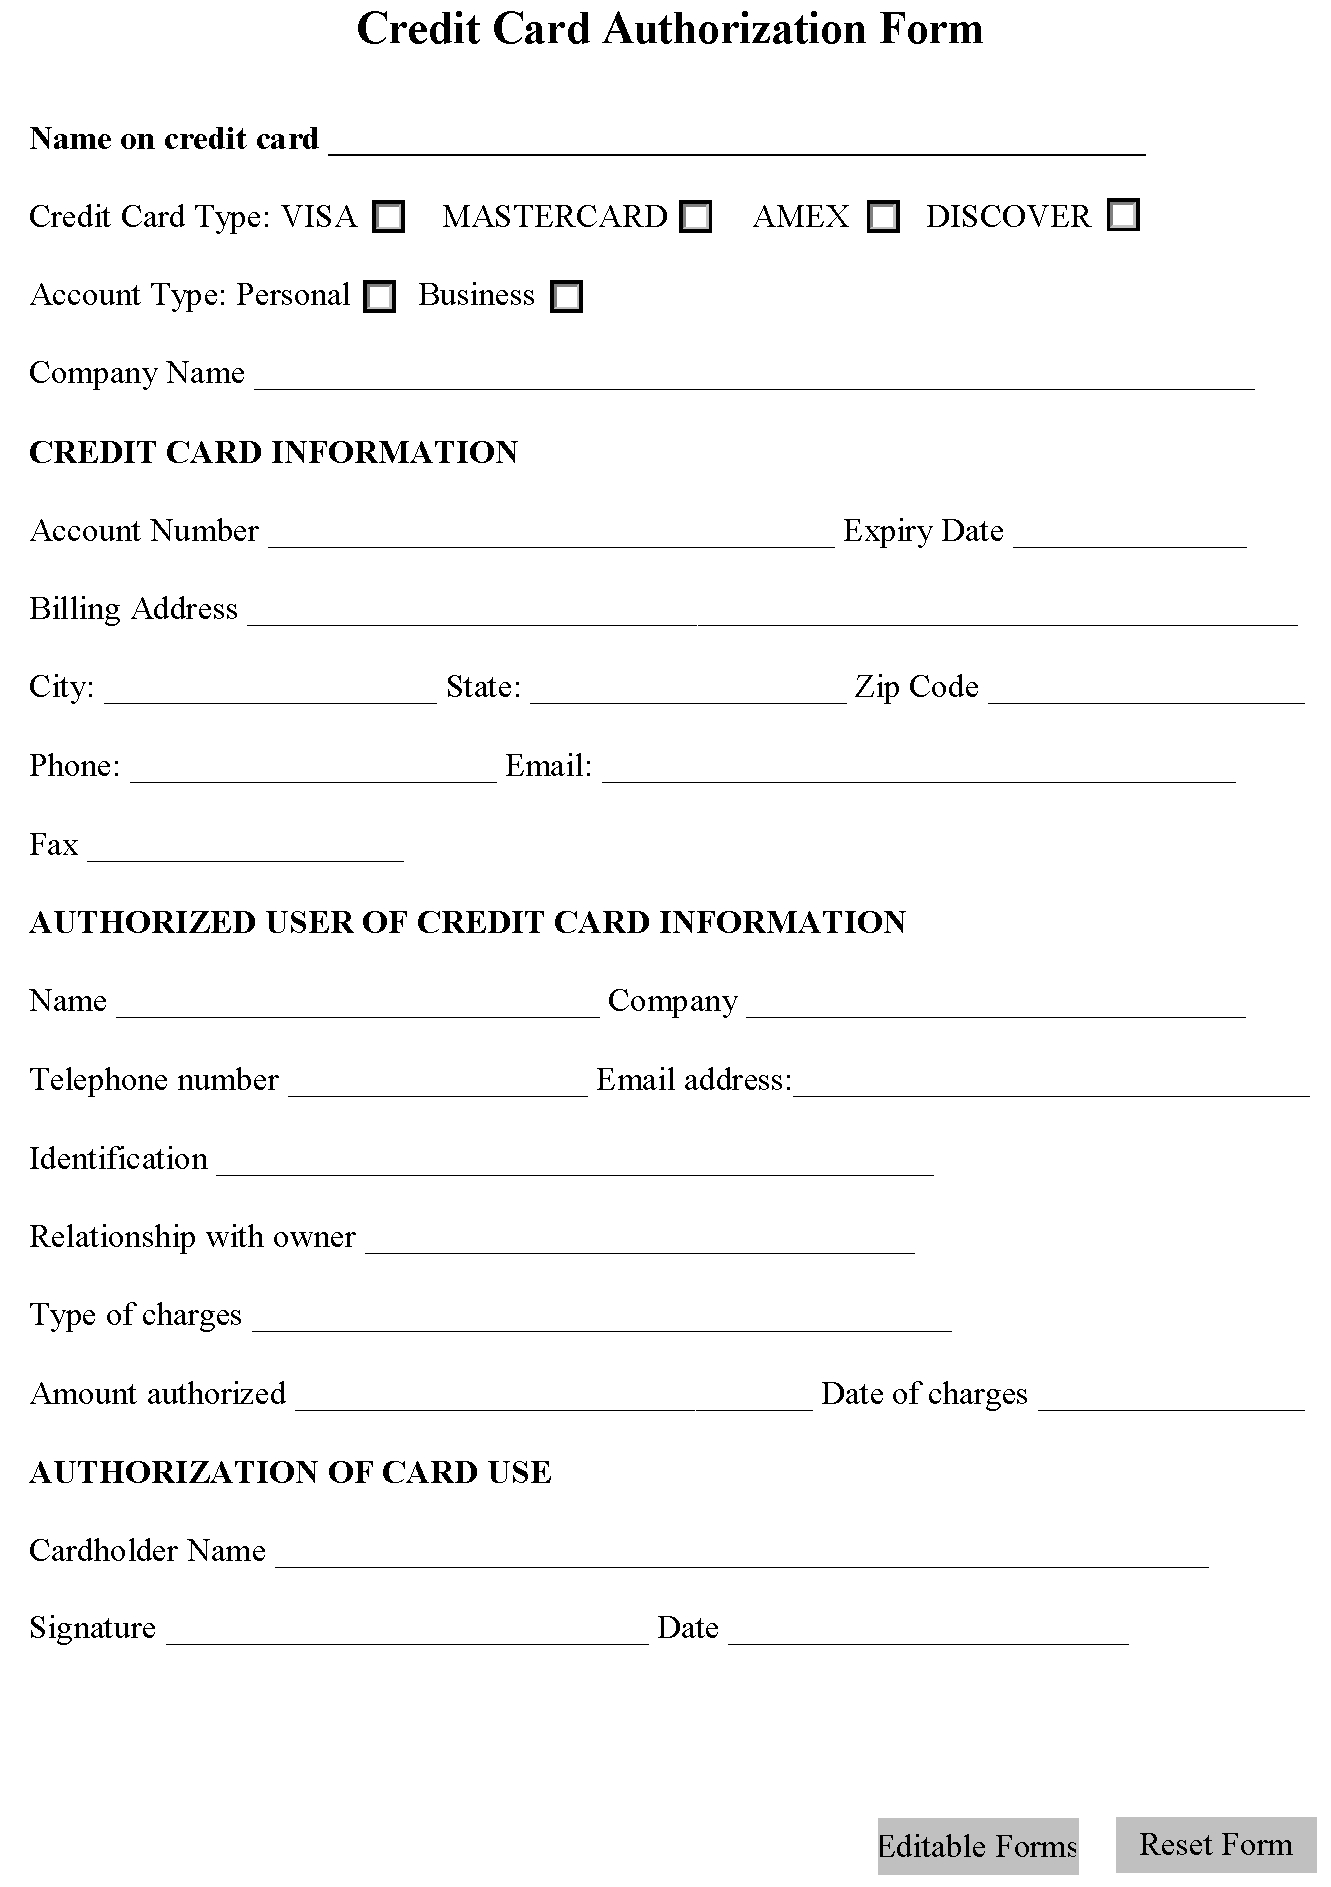 Credit Card Authorization Form | Editable Forms Pertaining To Credit Card Authorization Form Template Word